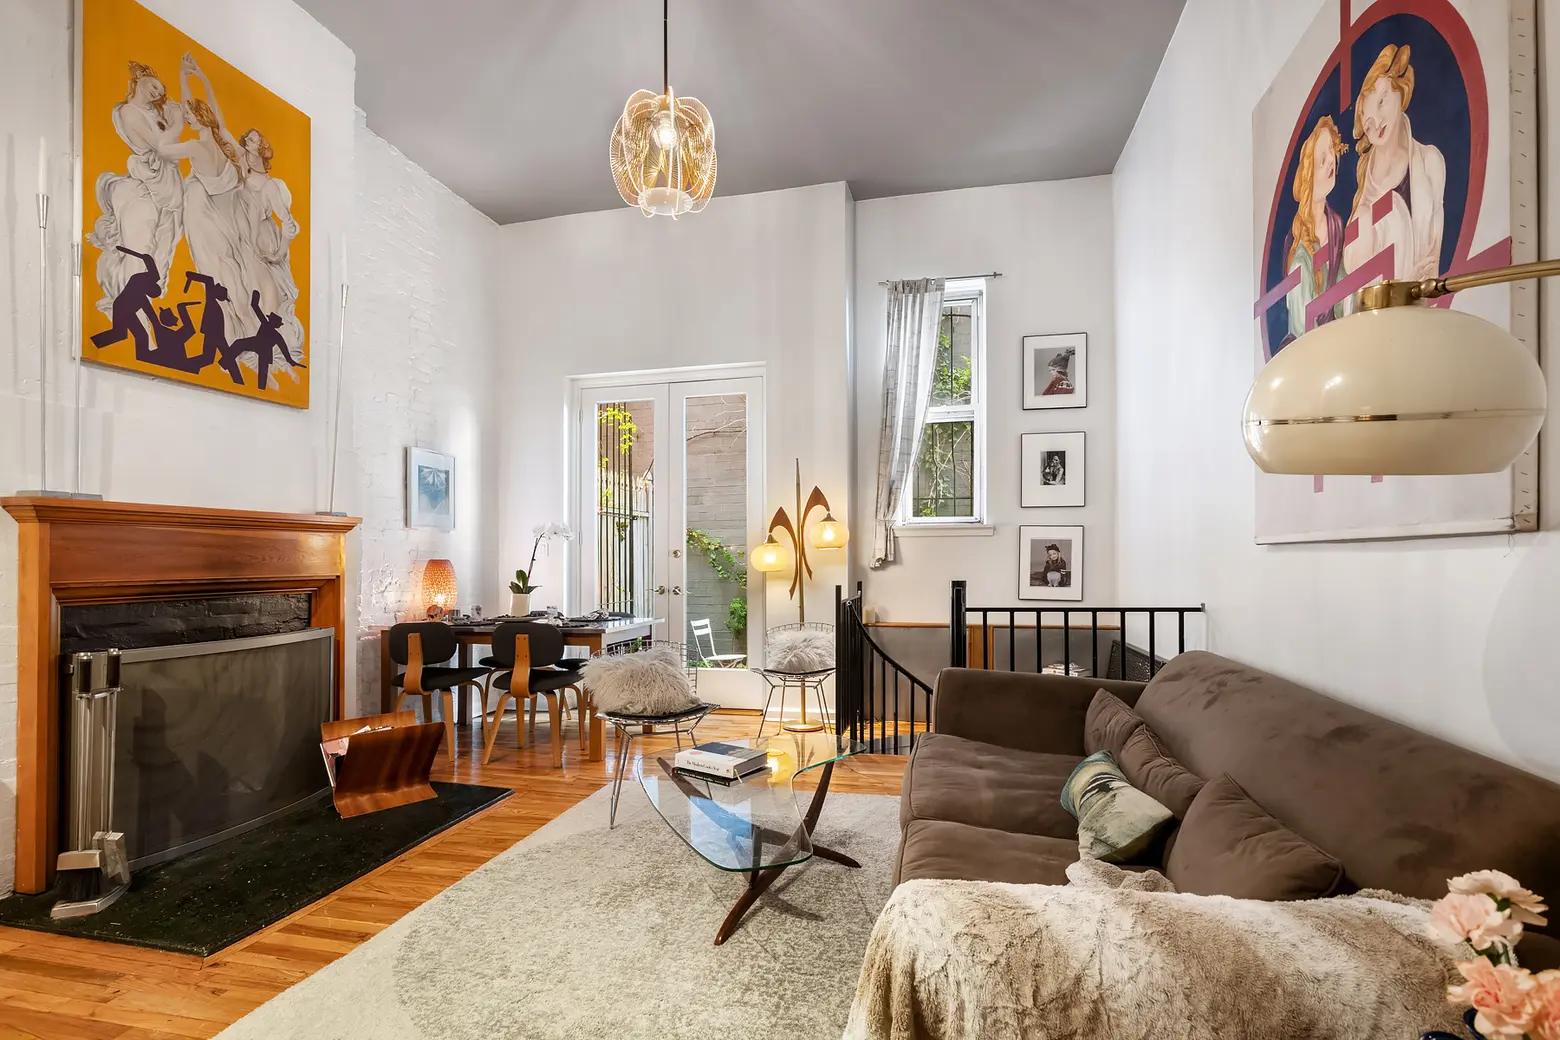 For under $1M, this East Village co-op has two floors, two bedrooms, and peaceful patio